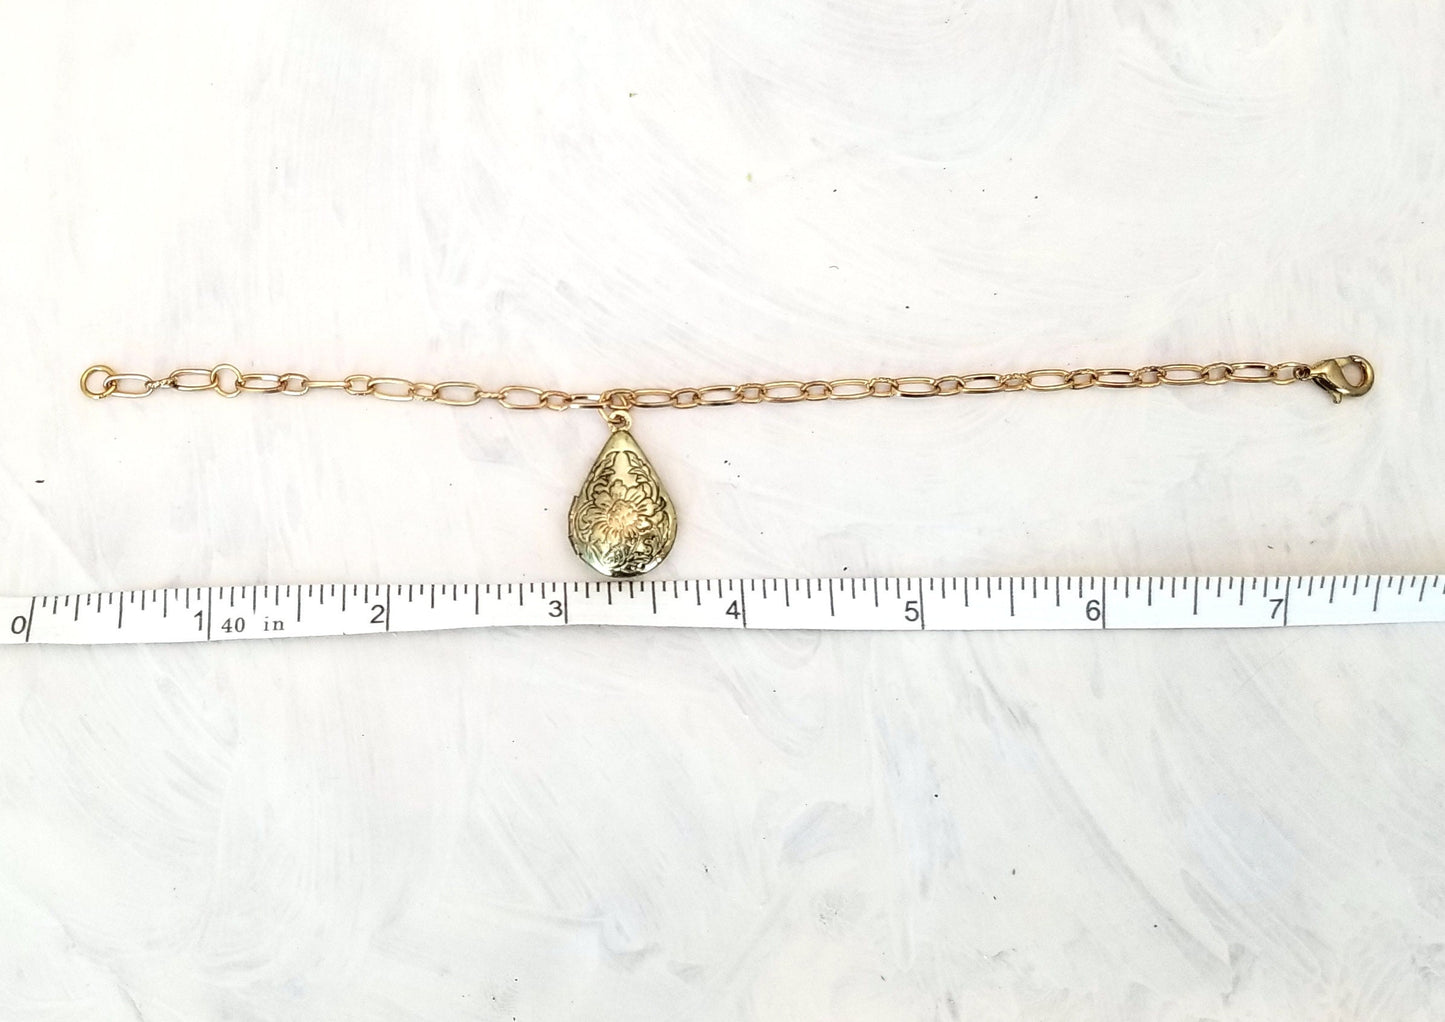 Upcycled Chain Bracelet with Locket, Antique Gold Color, Lobster Clasp, 7.5 inches, 19 cm, Minimalist, Boho, Bohemian